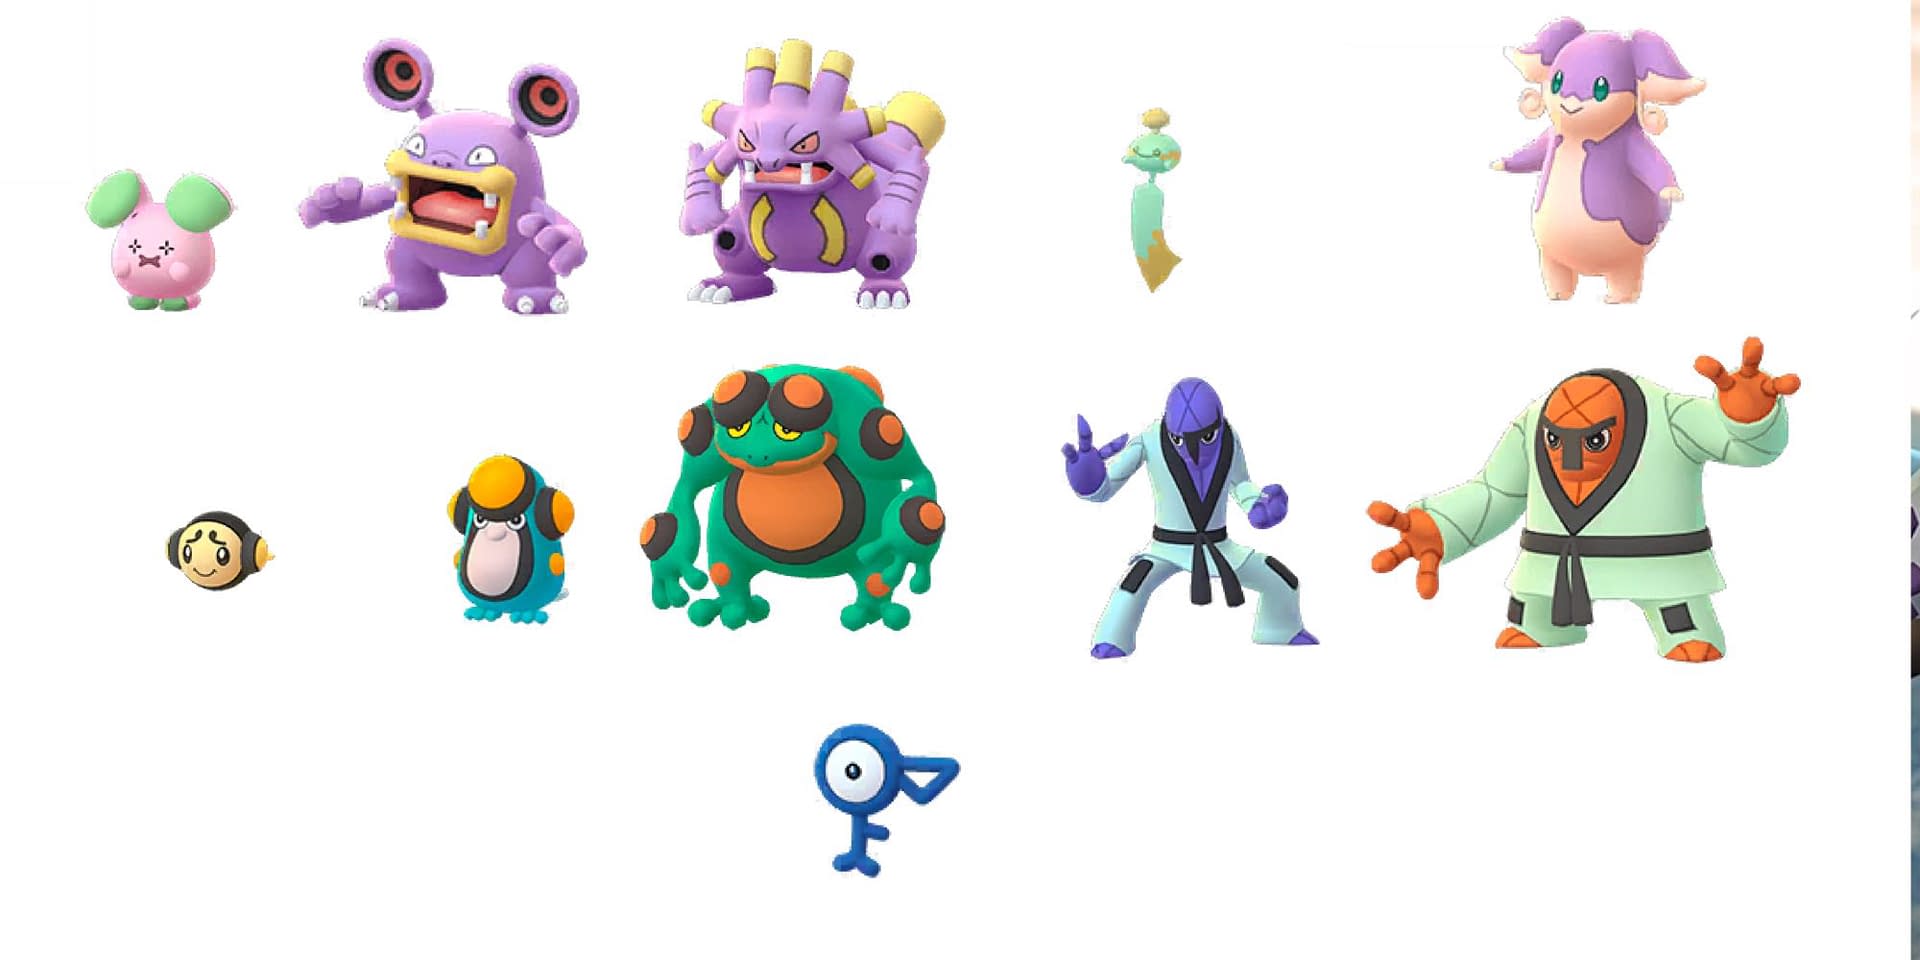 The New Shinies Coming To Pokémon GO Fest 2021